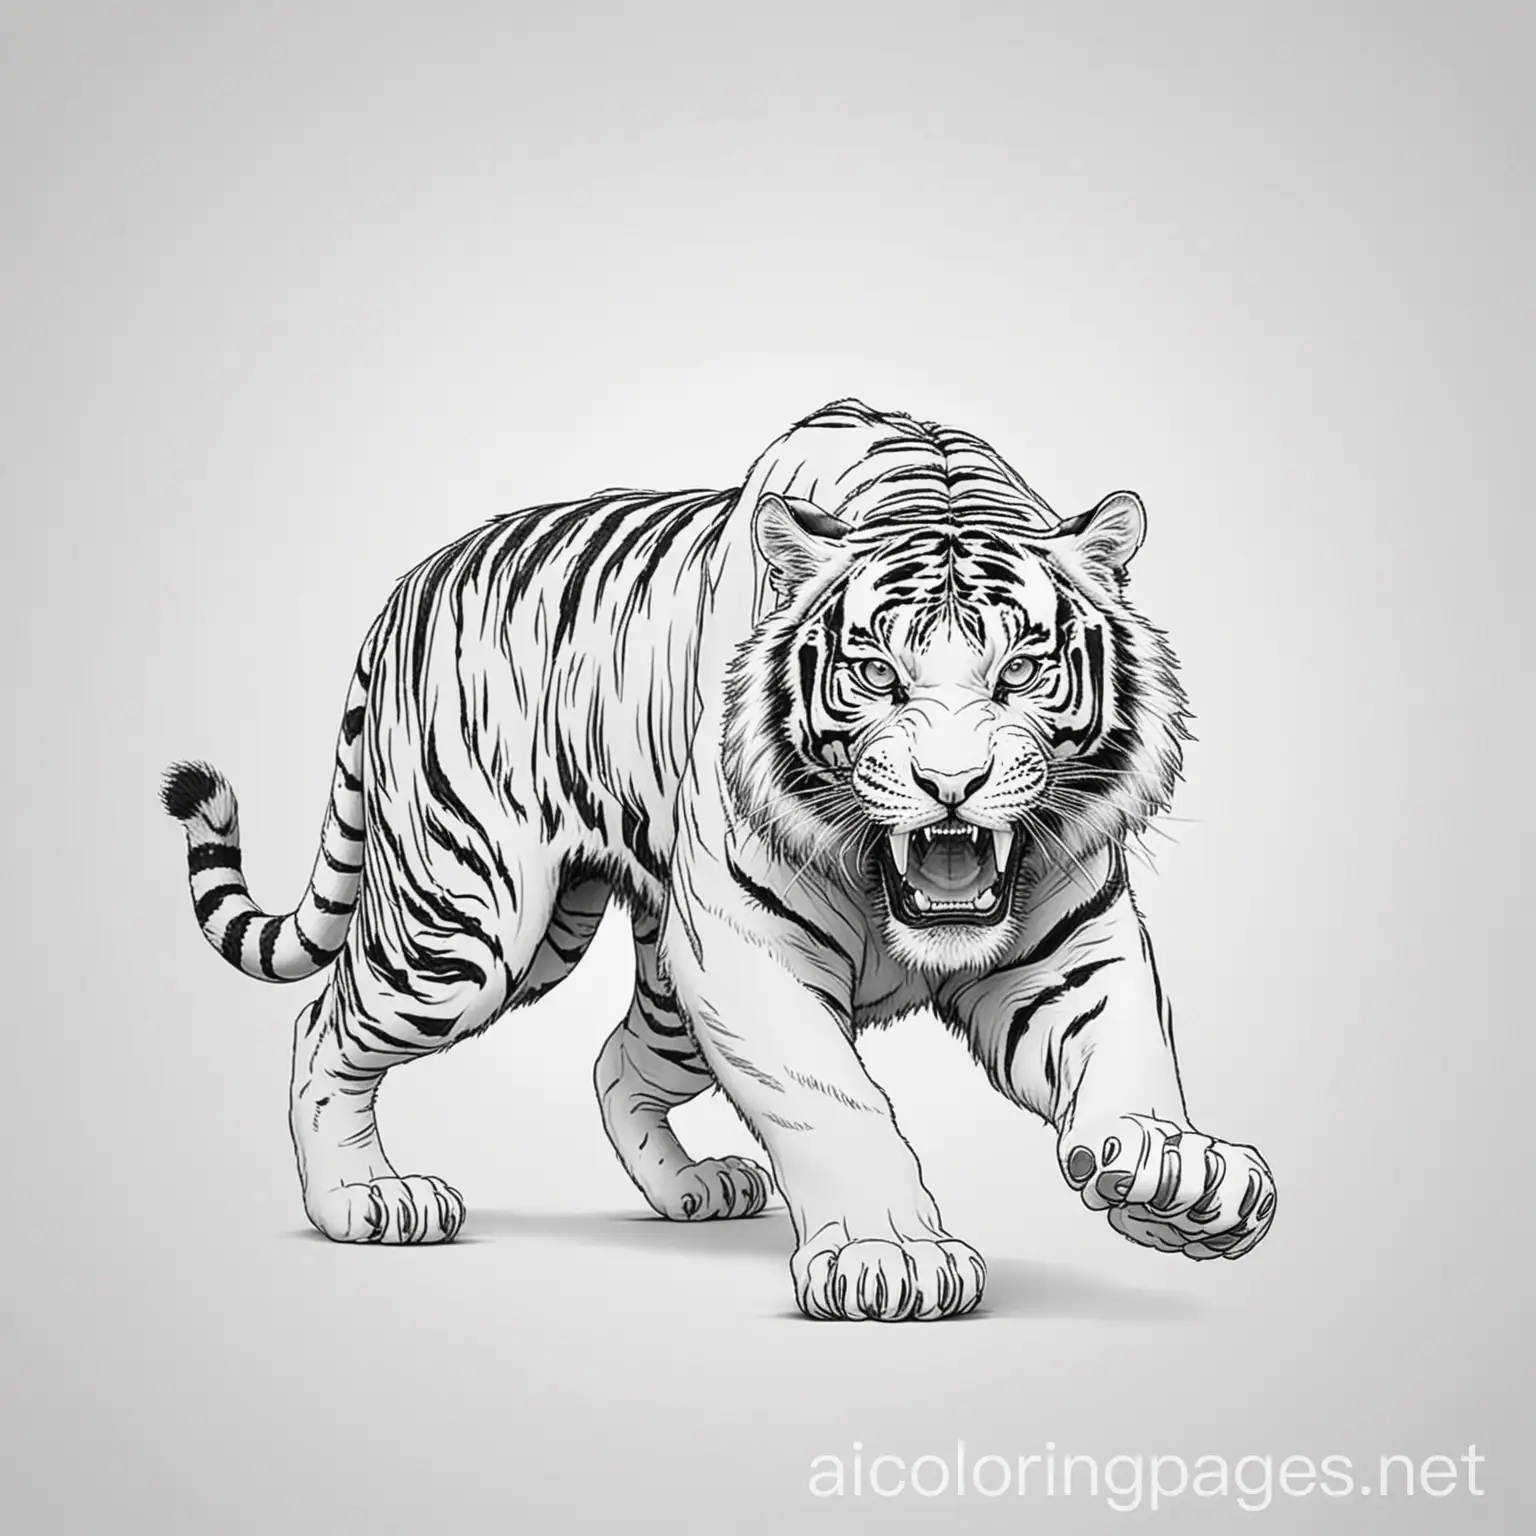 Fierce-Tiger-Coloring-Page-Roaring-Predator-Ready-to-Pounce